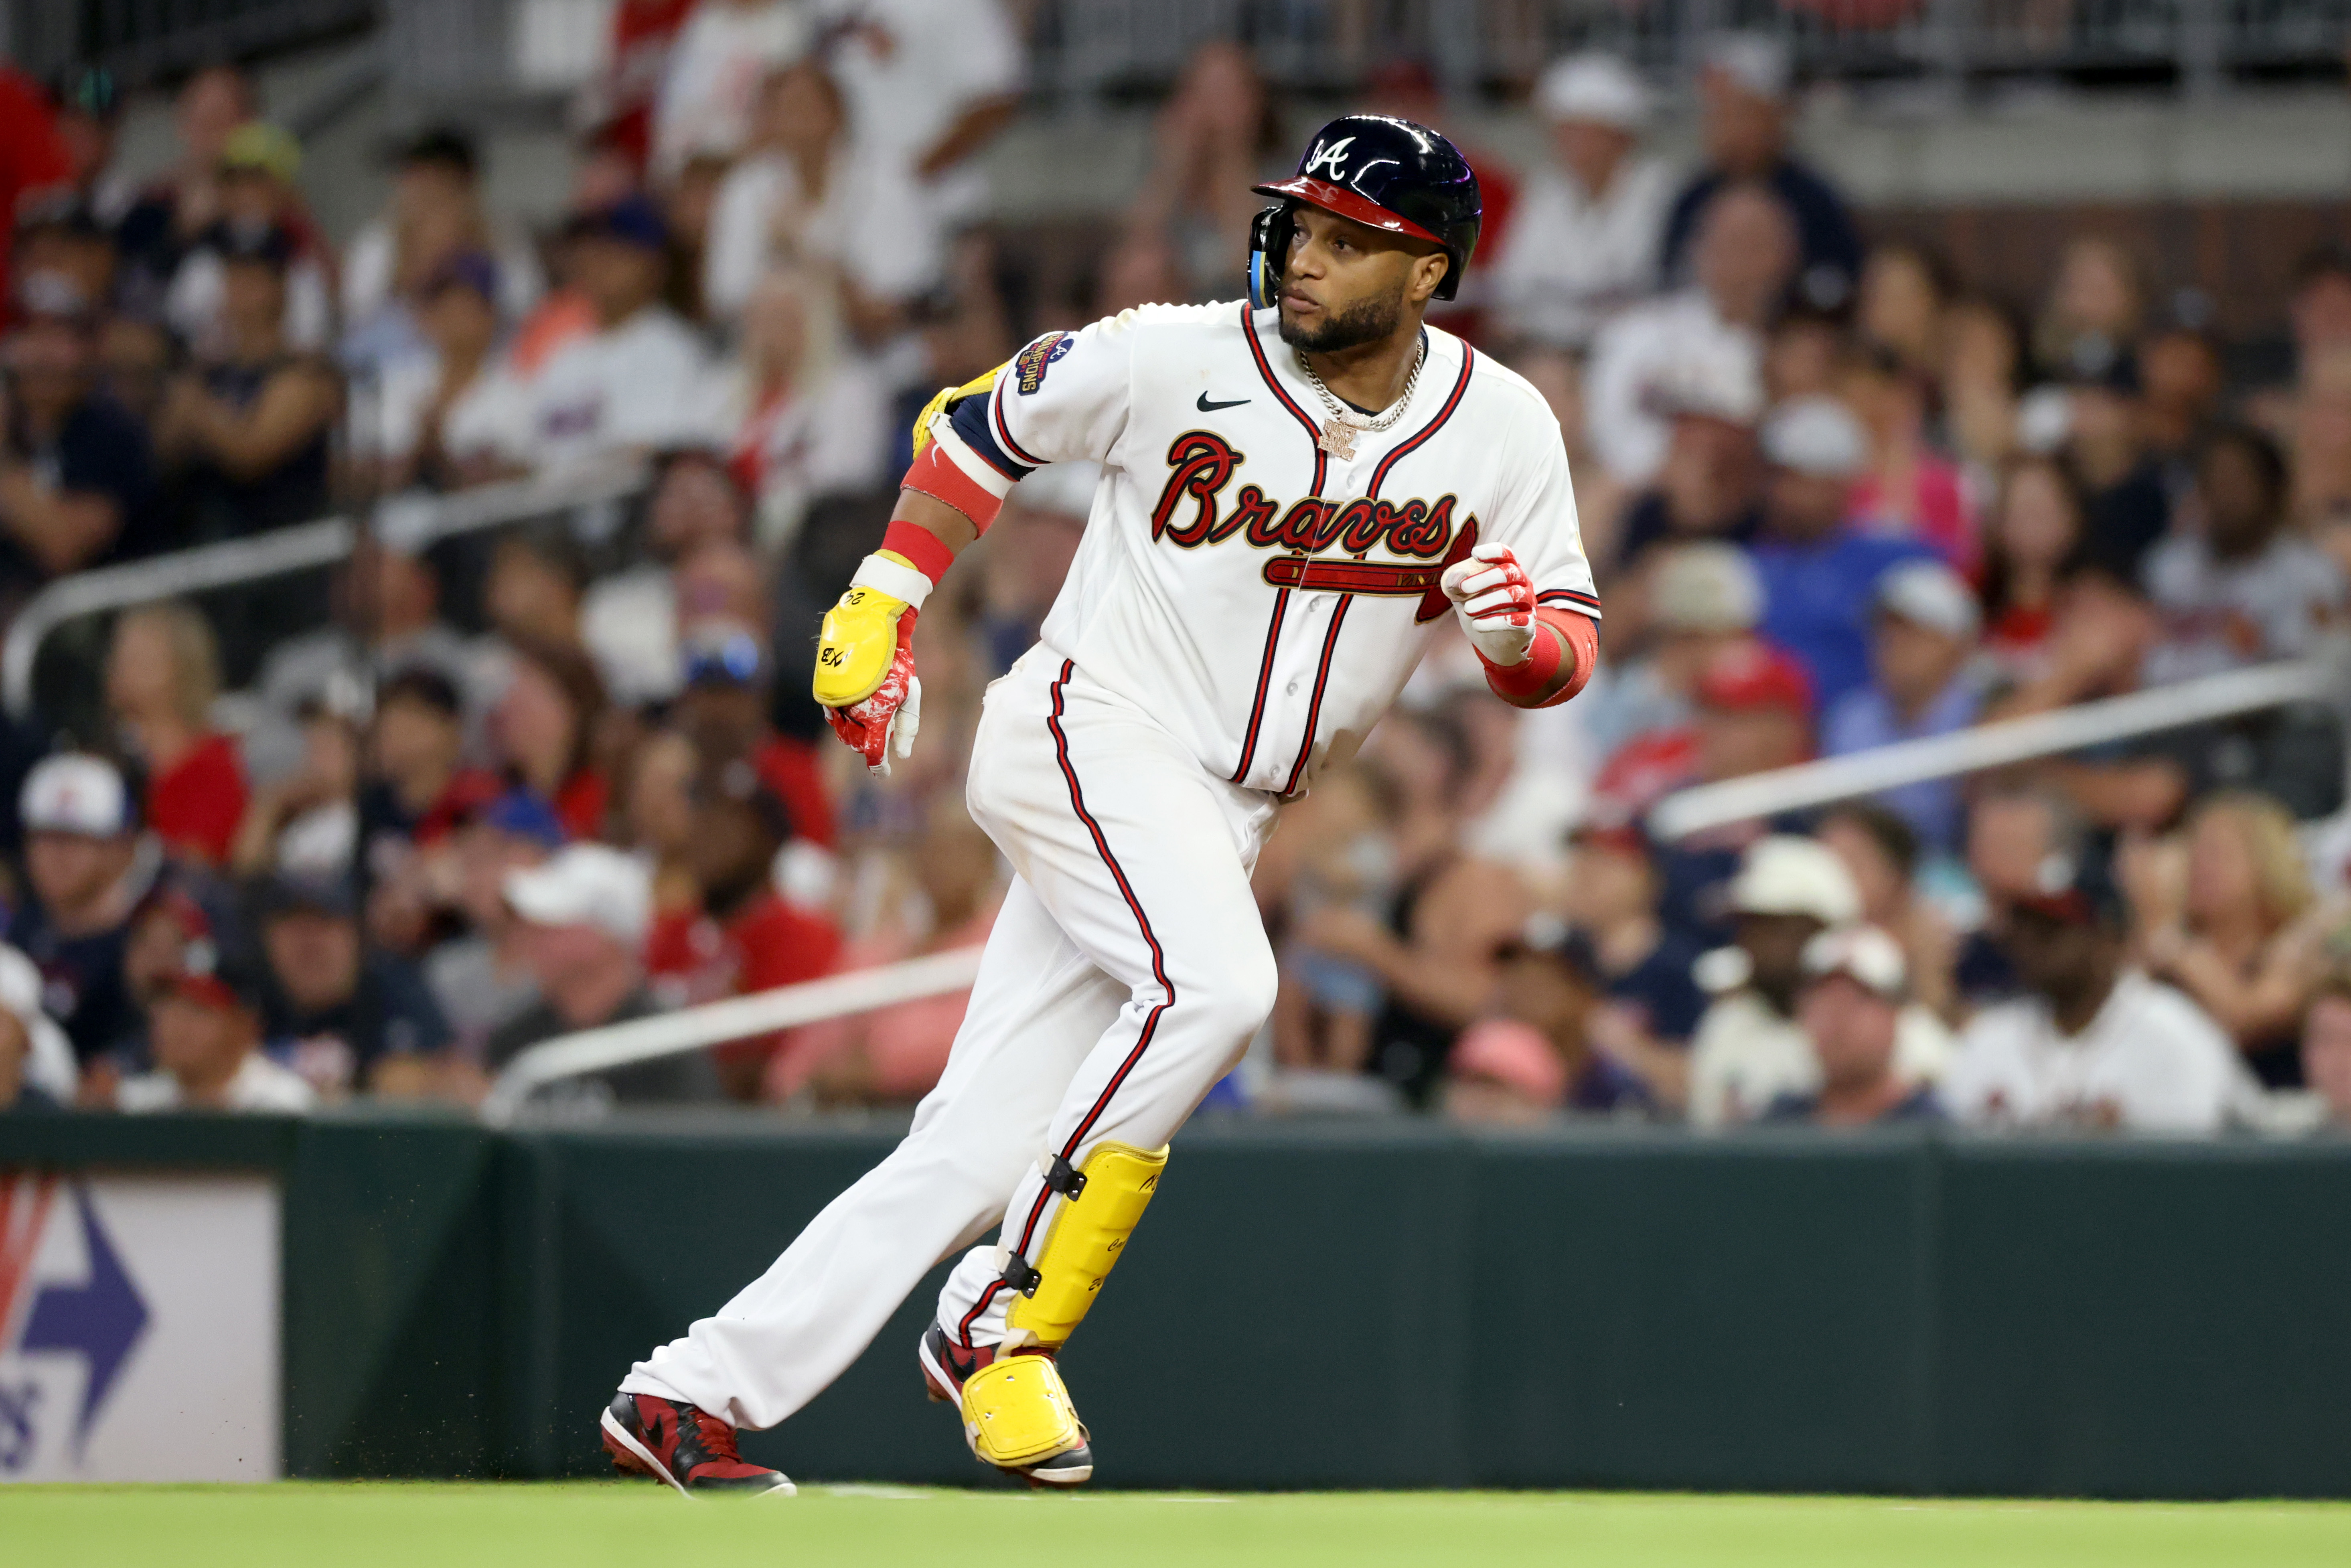 Robinson Canó joins Braves: 'I feel that I can still play